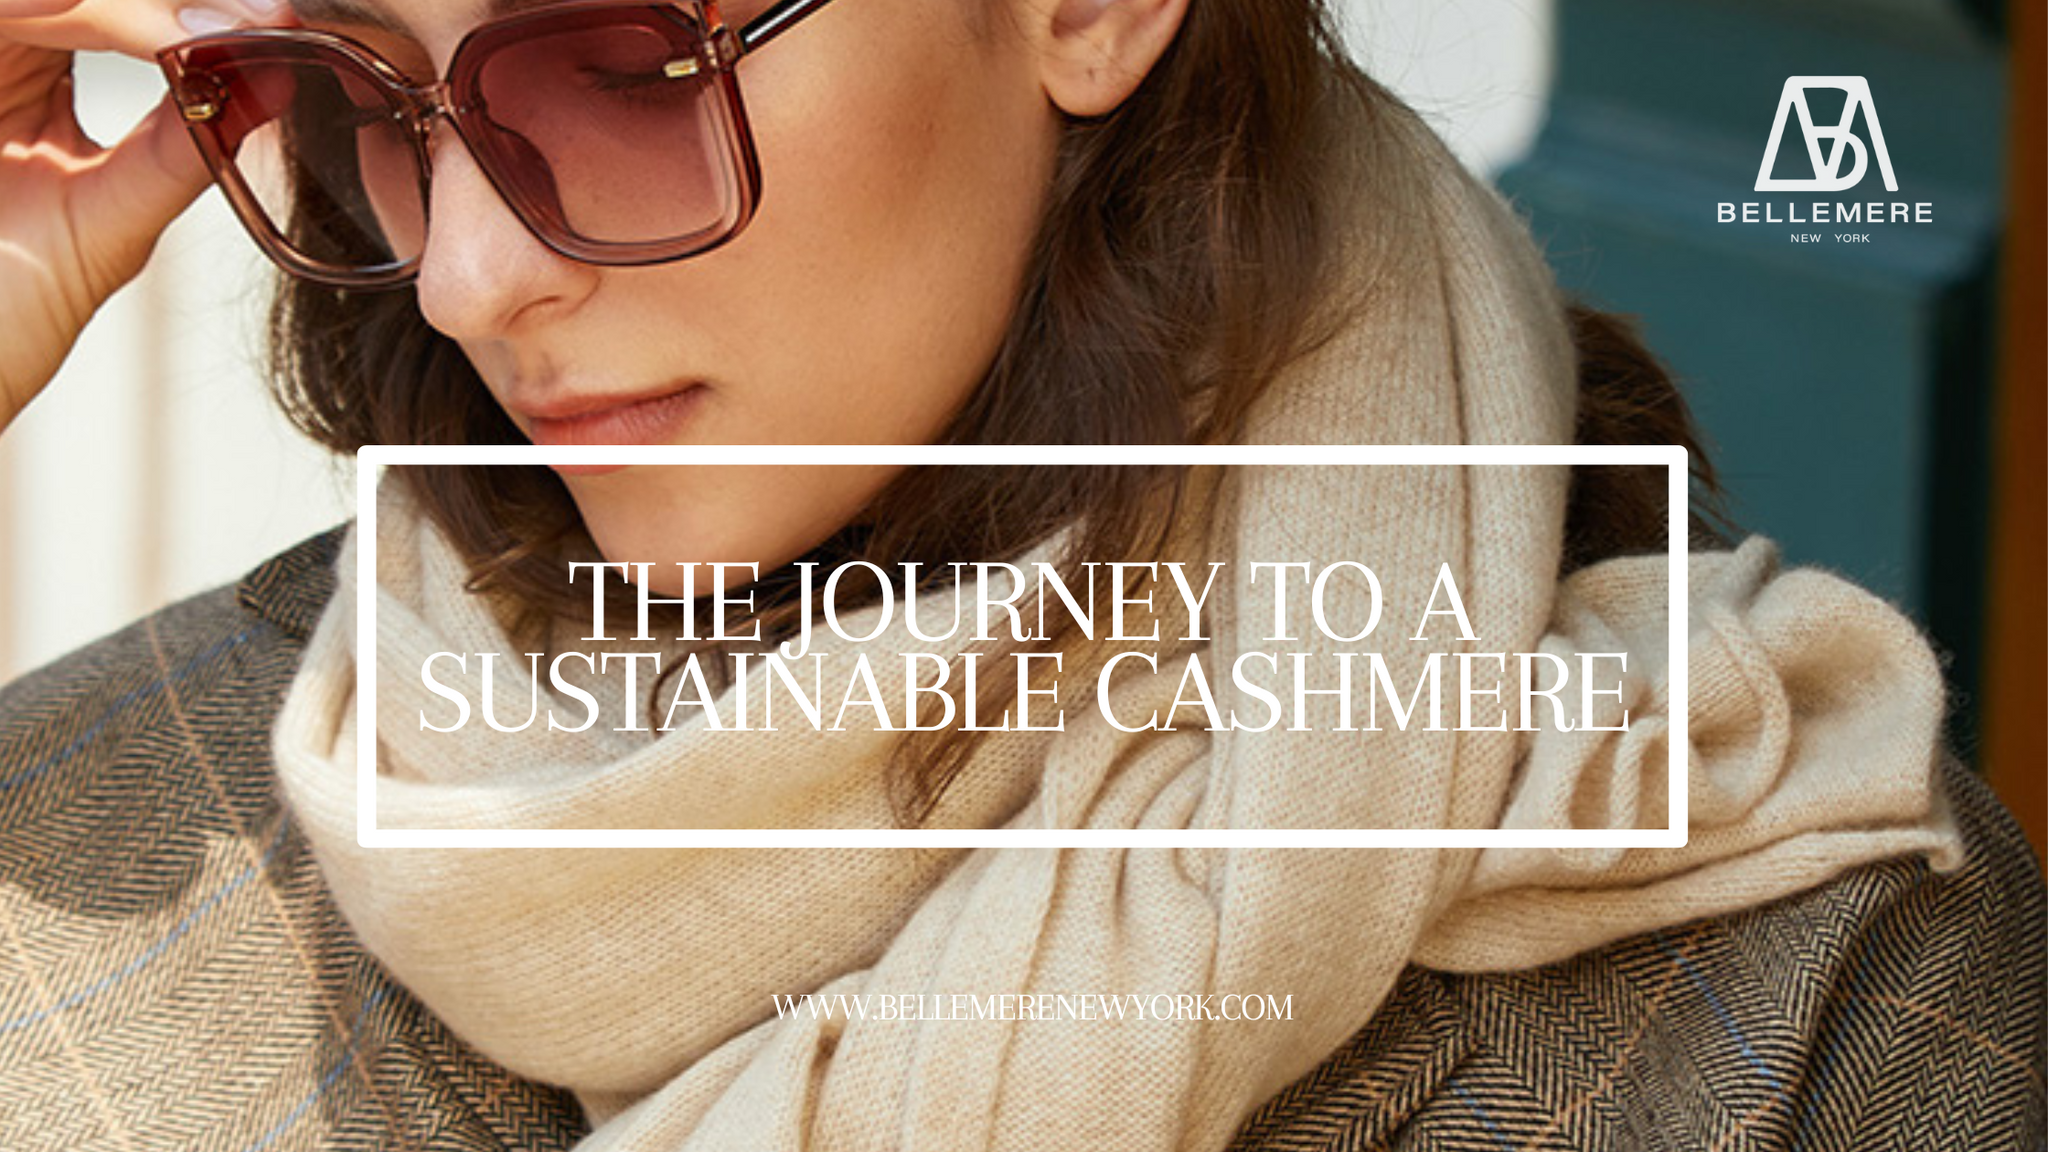 The Journey to a Sustainable Cashmere